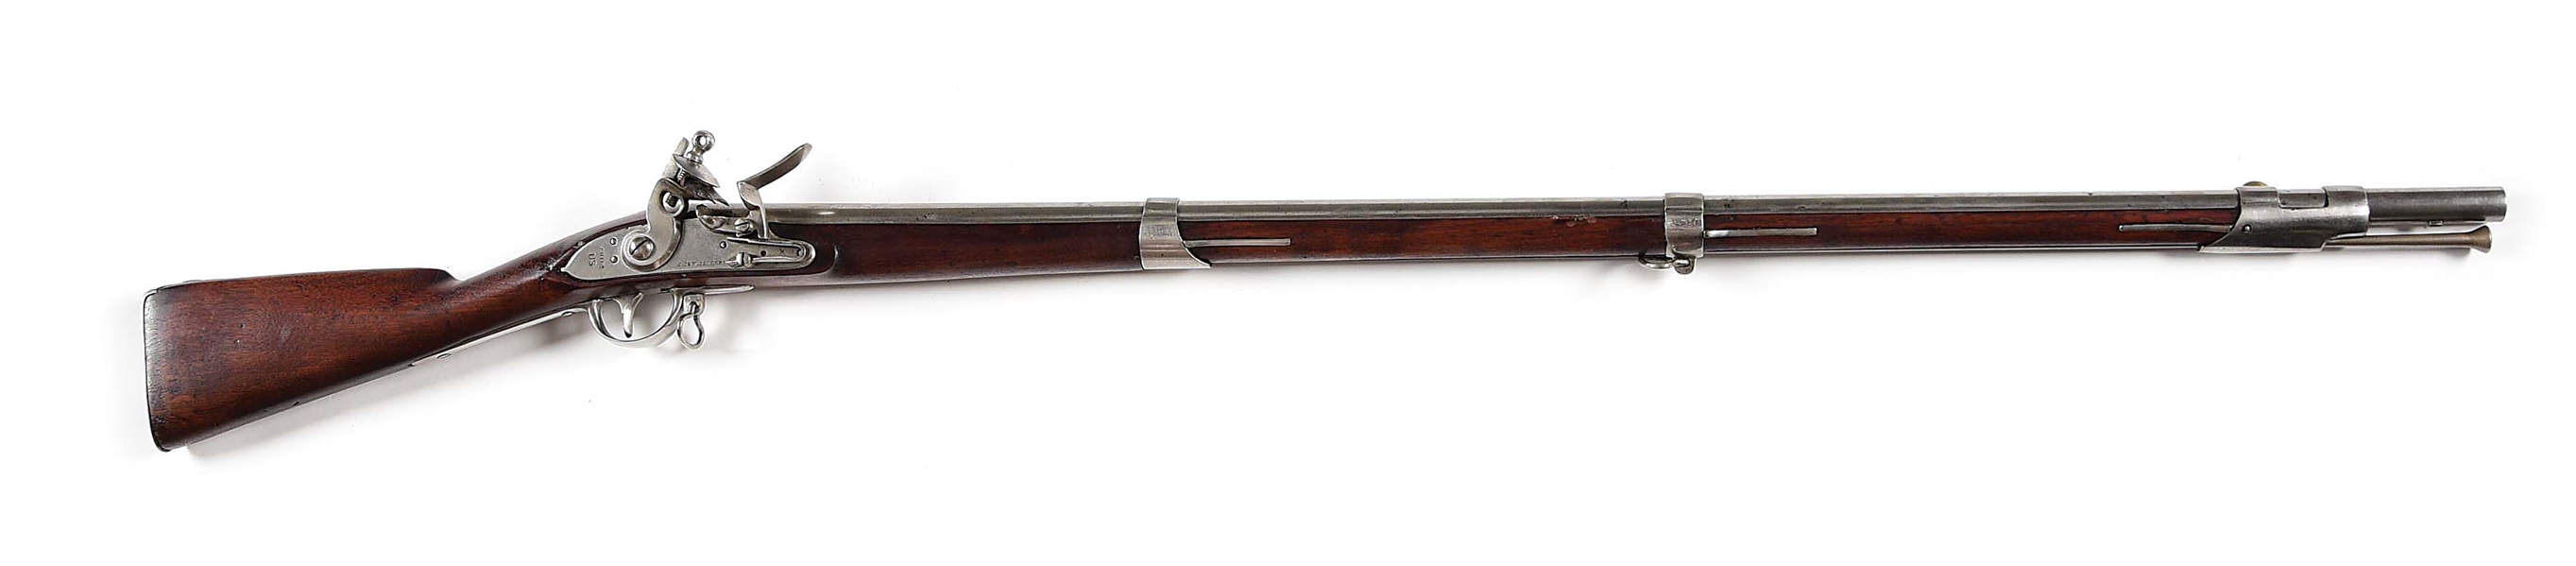 (A) EXCELLENT 1812 CONTRACT FLINTLOCK .69 CALIBER MUSKET BY HENRY.